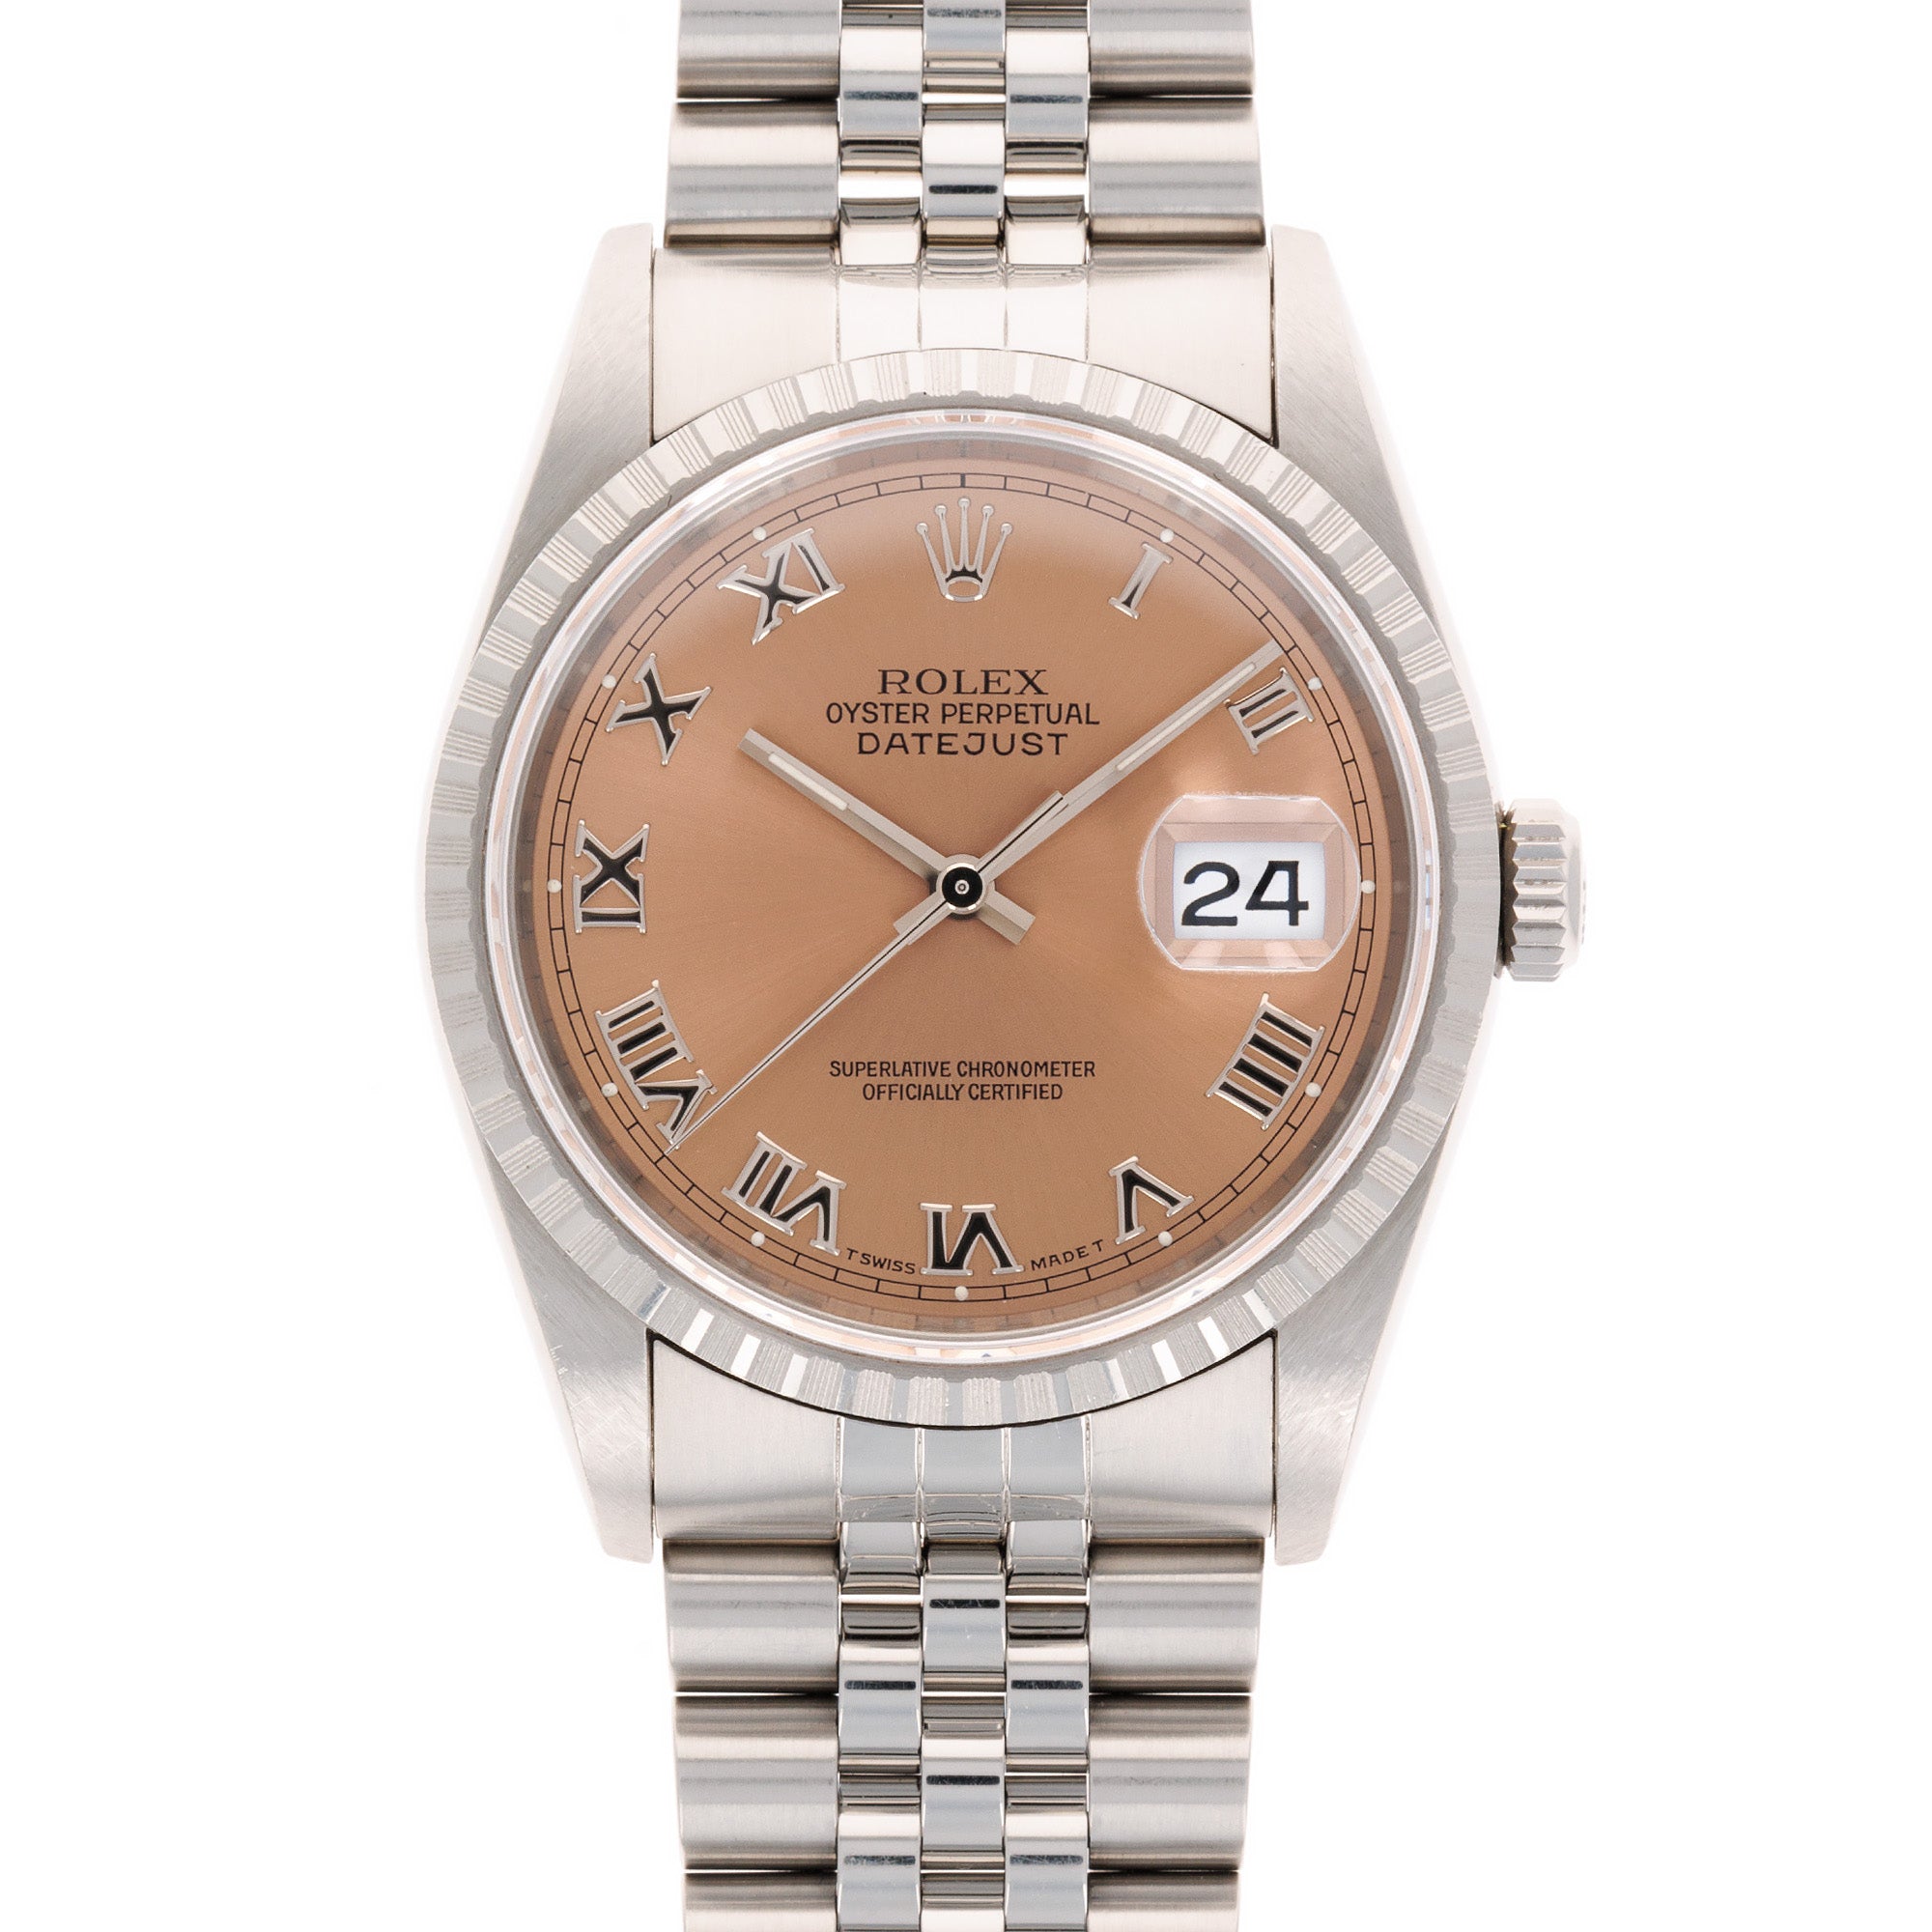 Rolex - Rolex Steel Datejust Ref. 16220 with Salmon Dial - The Keystone Watches